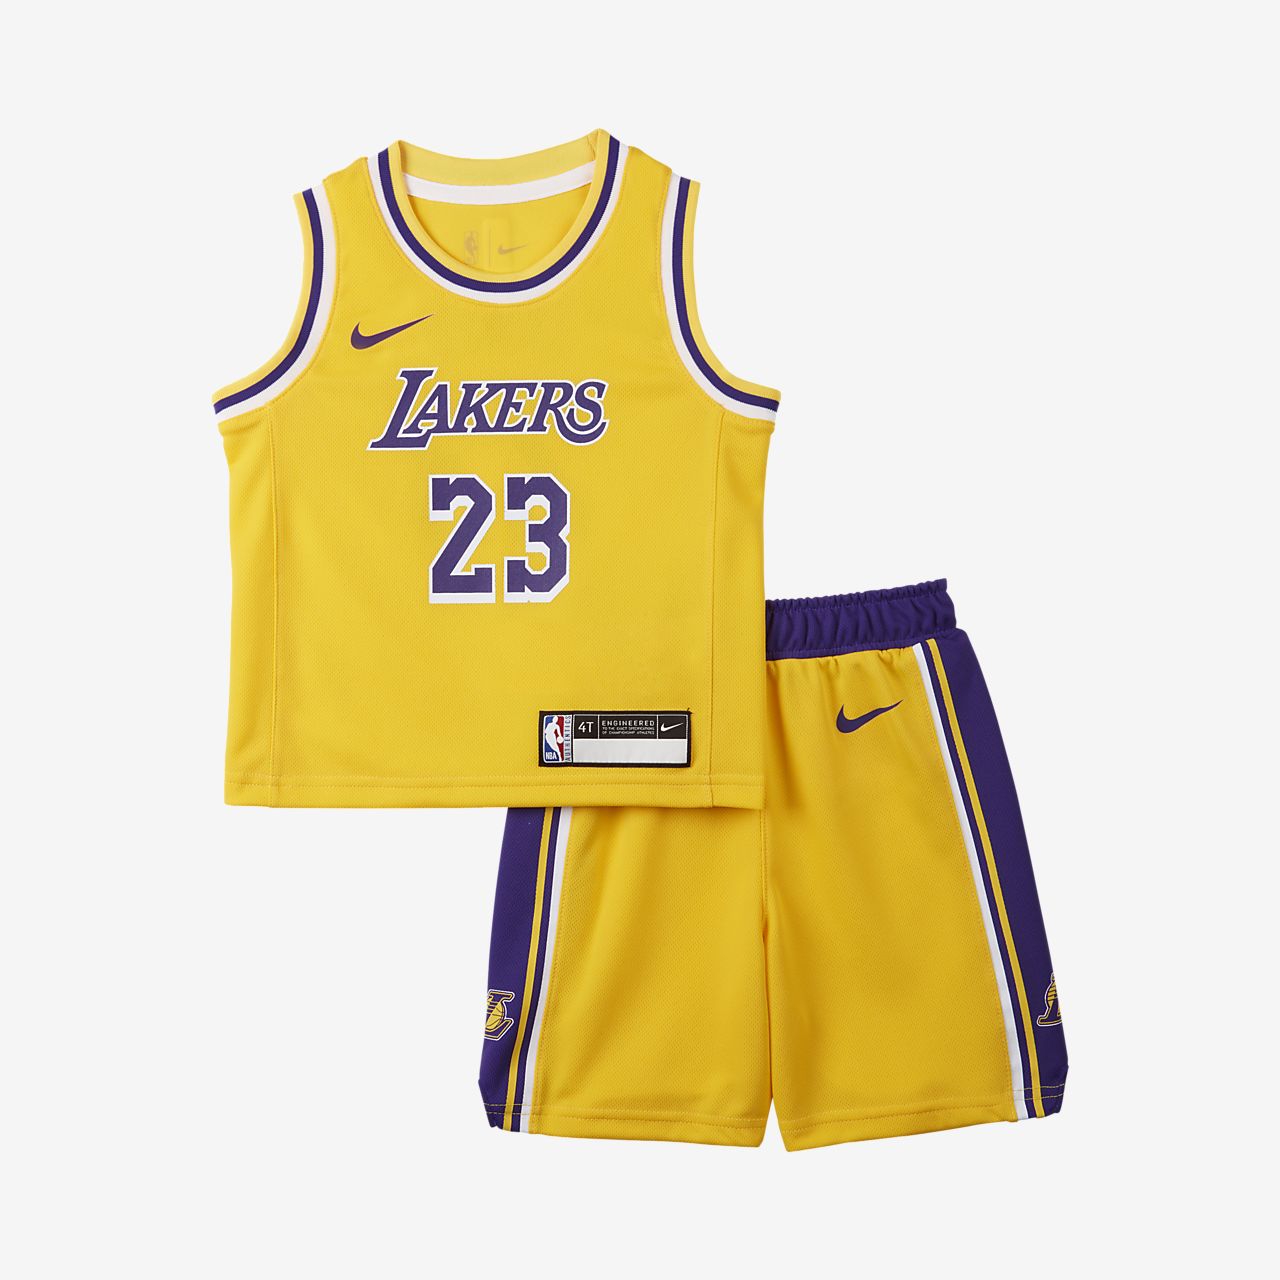 3t lakers jersey